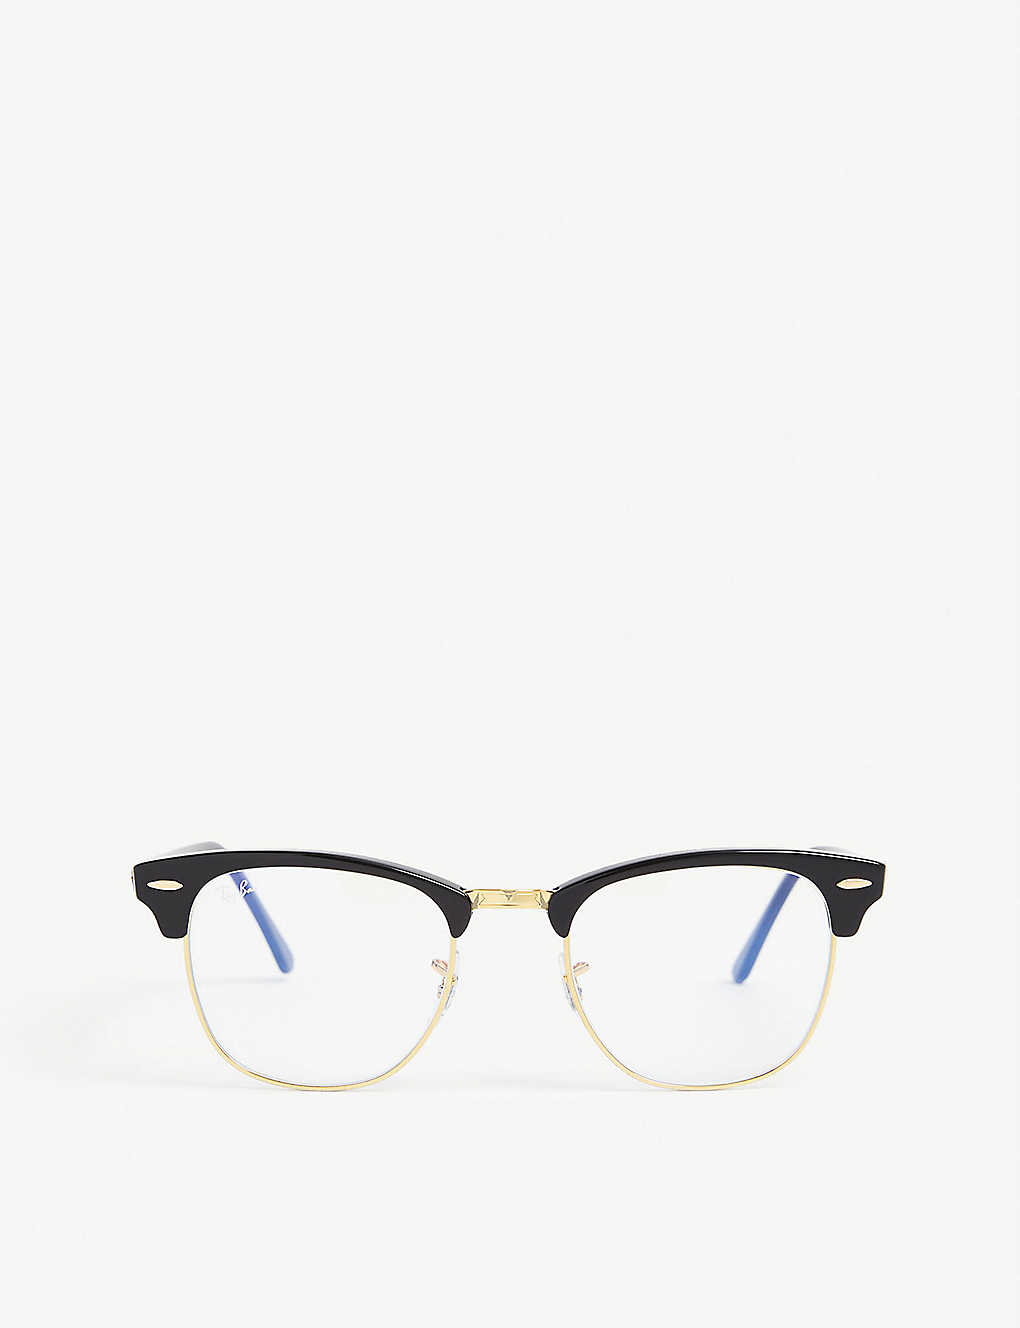 Ray Ban Rb 3016 Clubmaster Acetate Glasses In Black